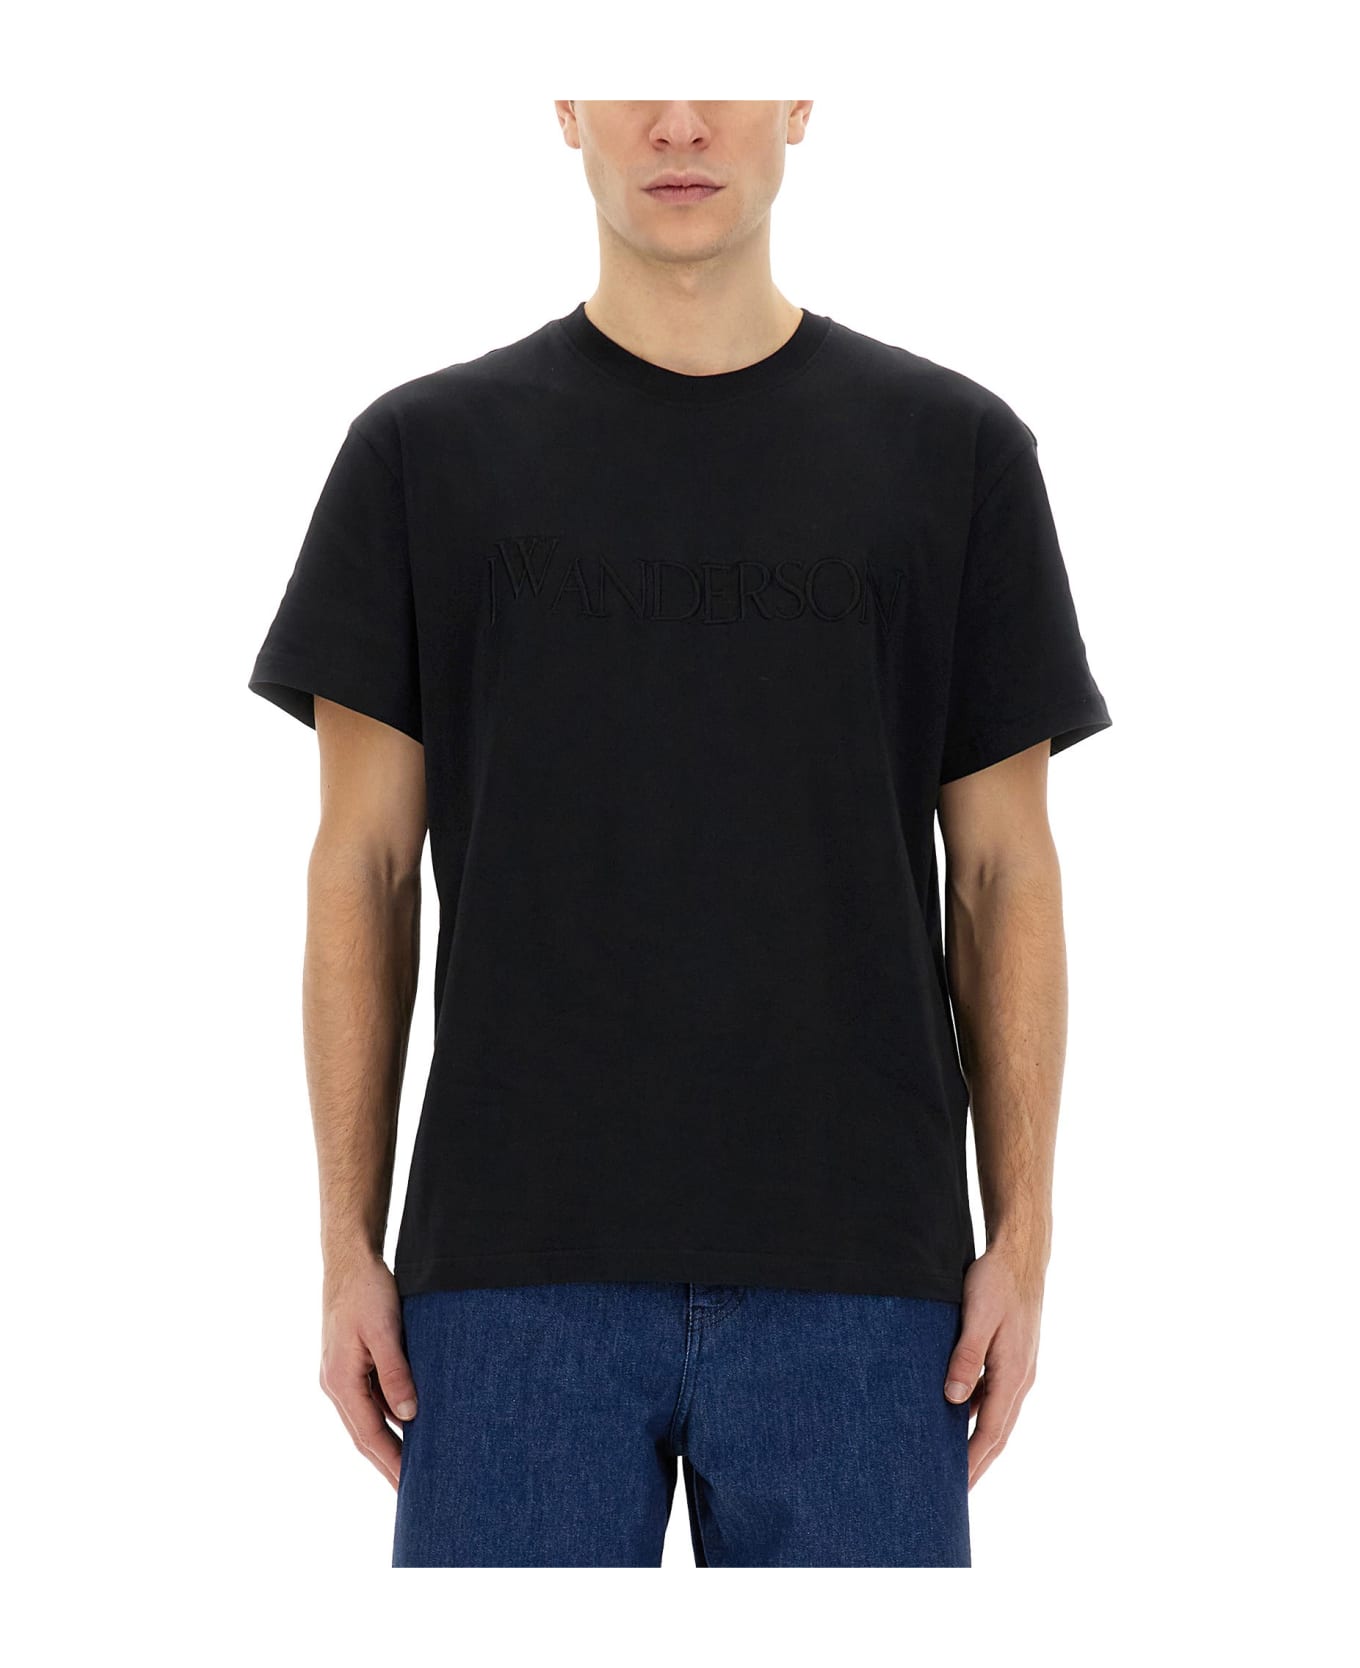 J.W. Anderson T-shirt With Logo - Black シャツ